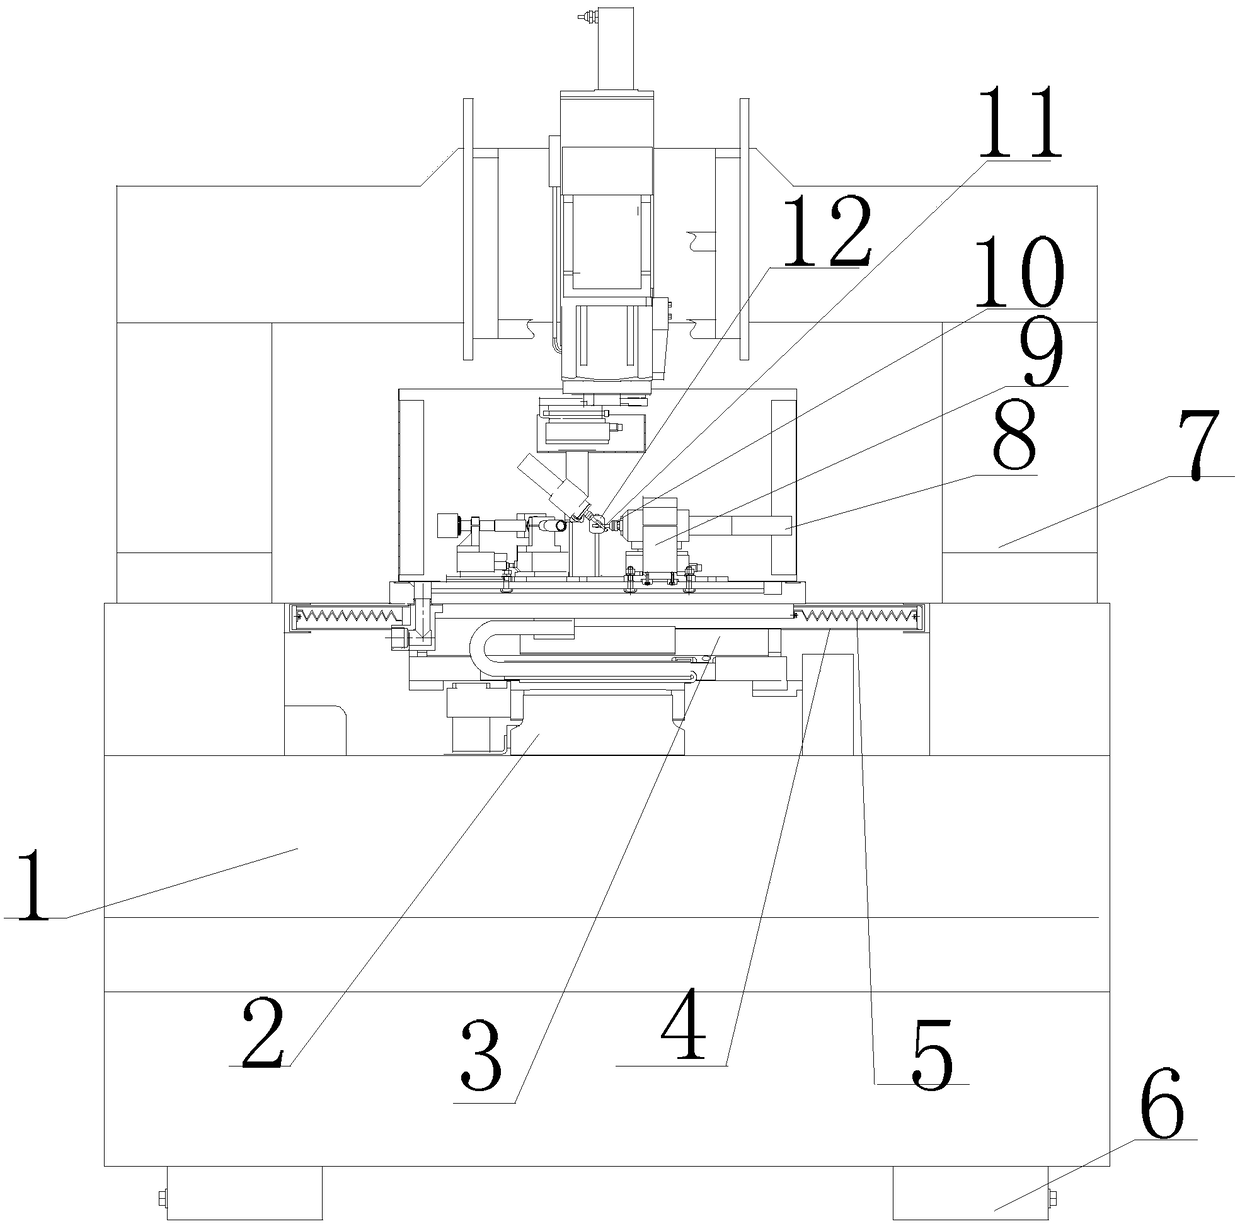 Machine tool for ultra-precision grinding of small-sized thin-walled complex structural parts